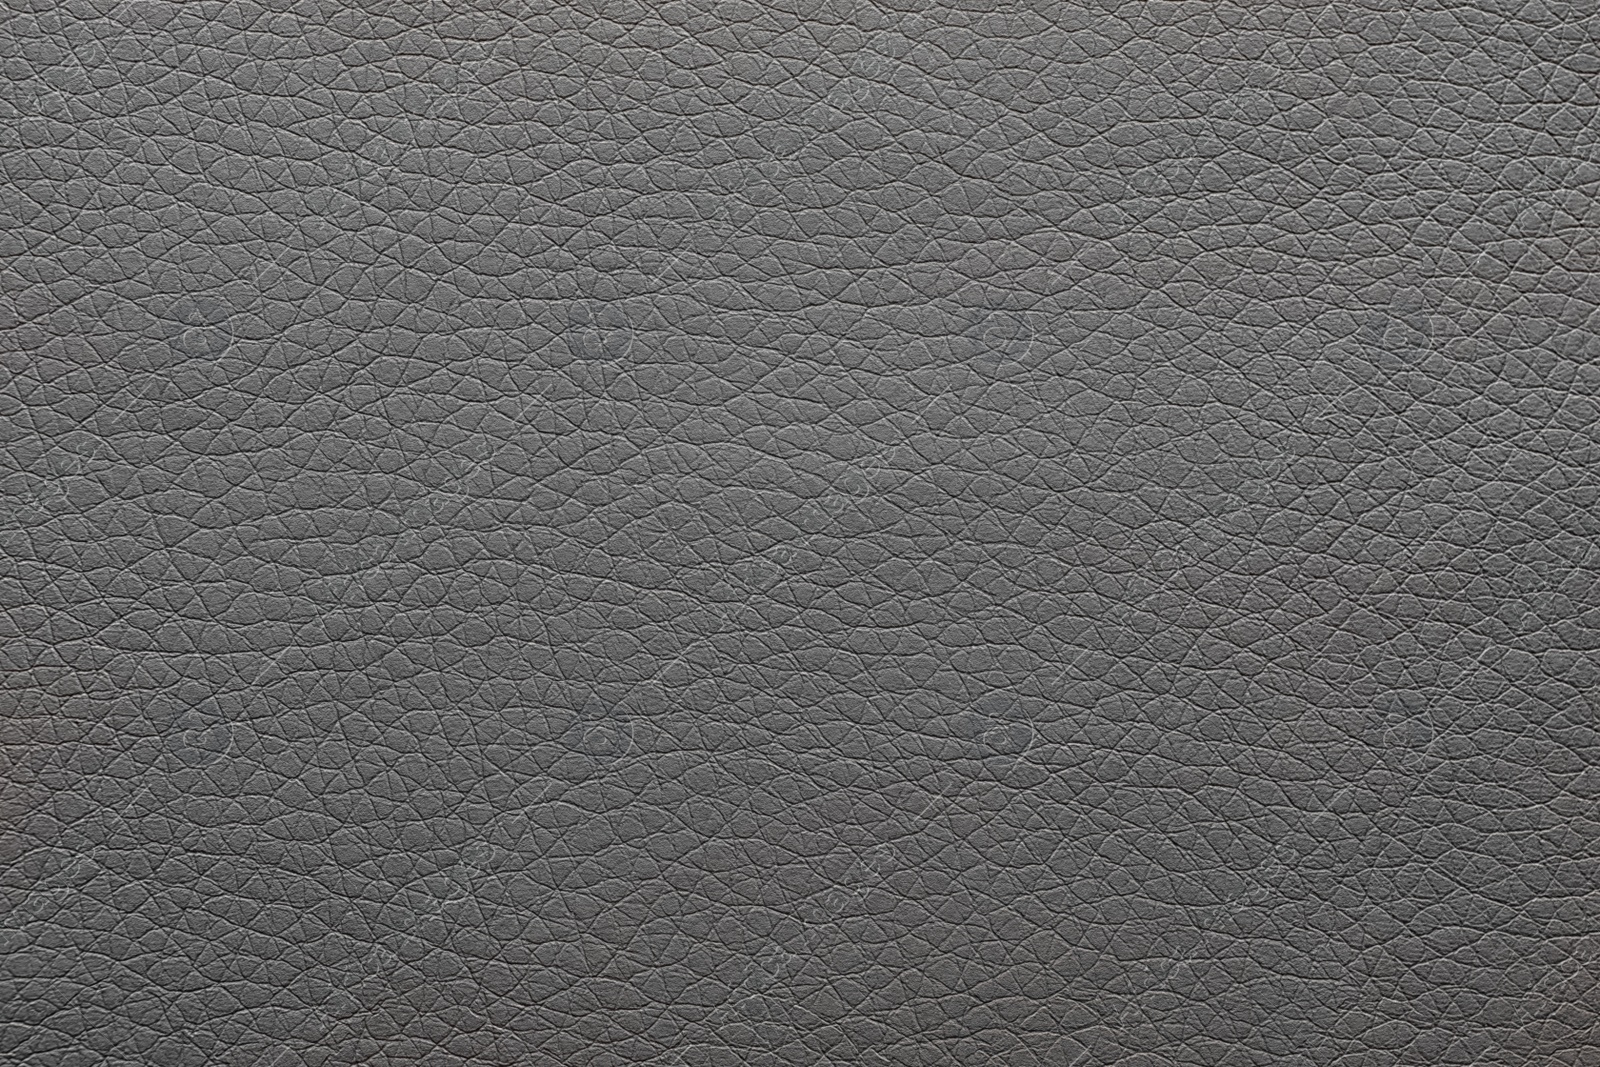 Photo of Texture of dark leather as background, closeup